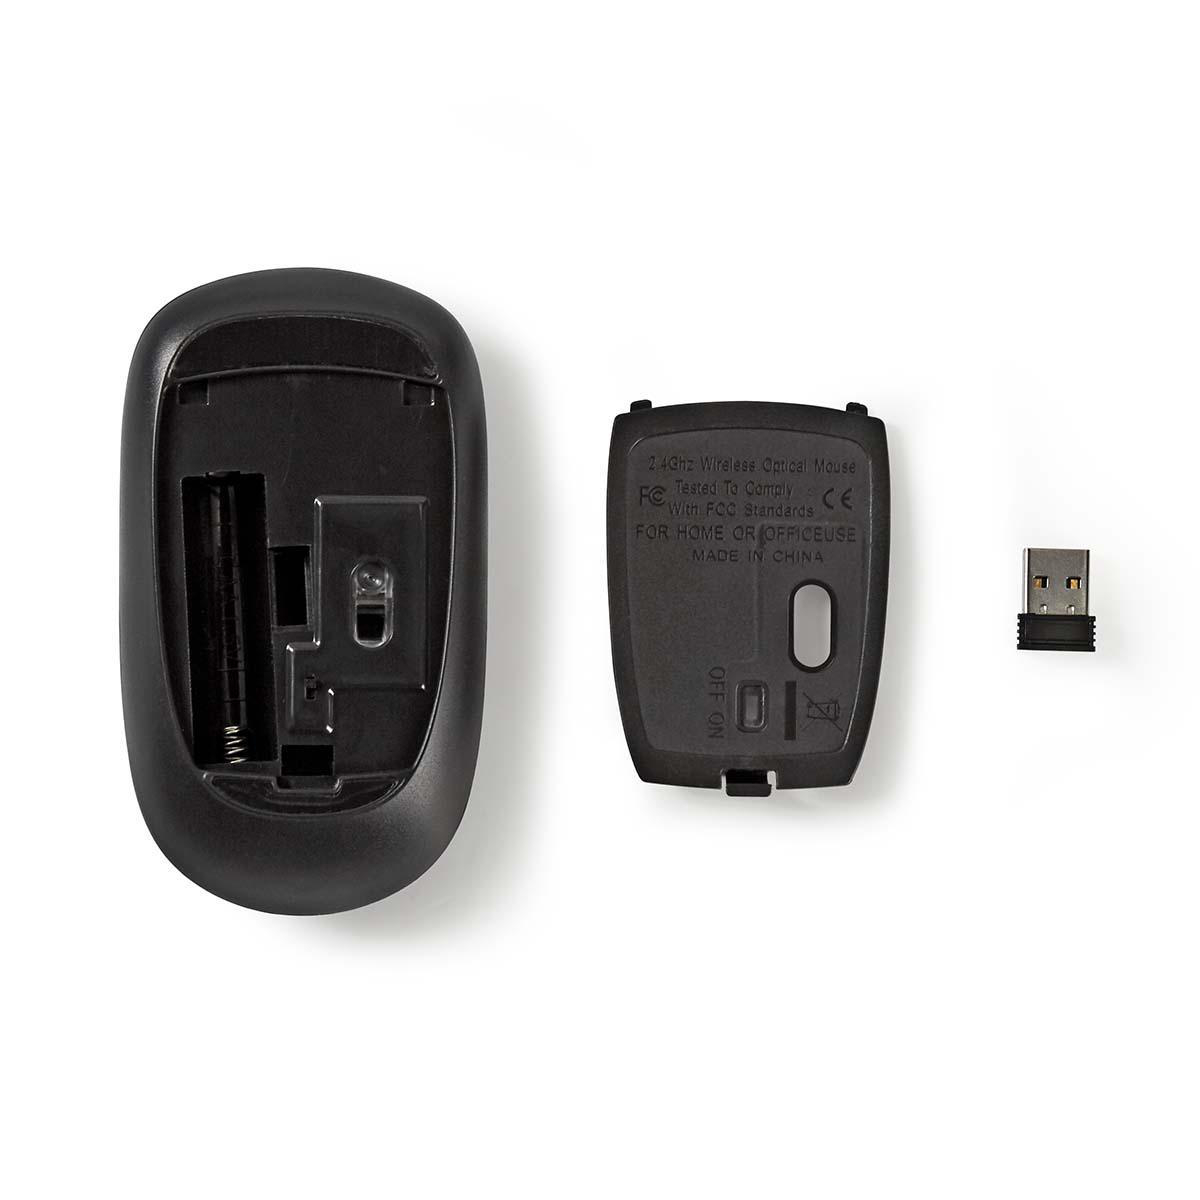 Nedis Wireless Mouse 800-1600dpi – Both Handed